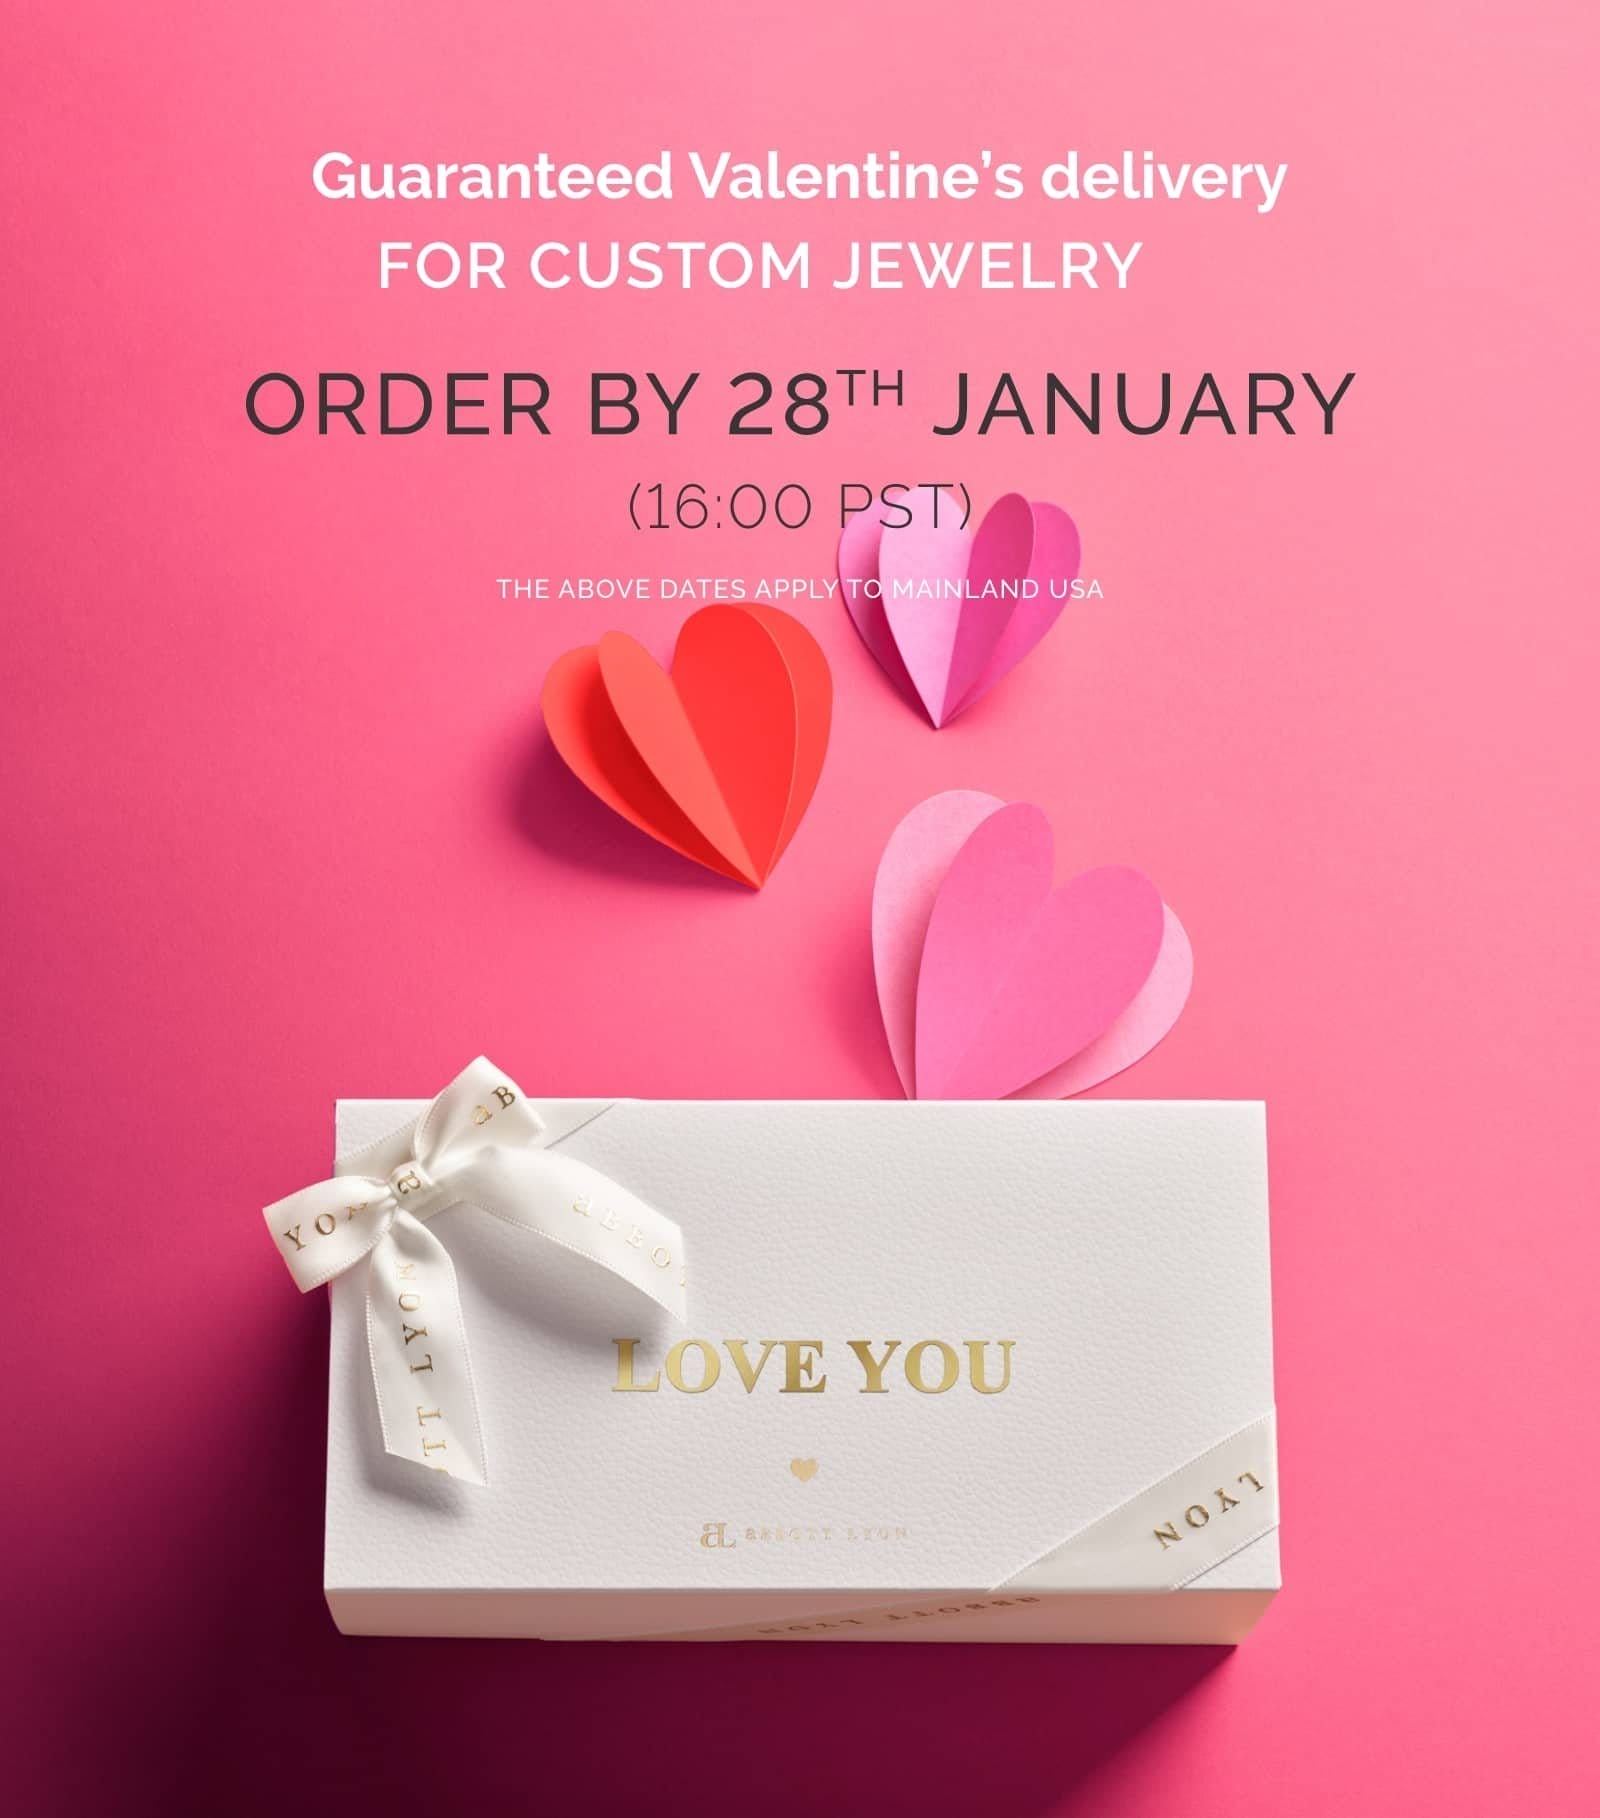 Order by 28th January for guaranteed Valentine's delivery